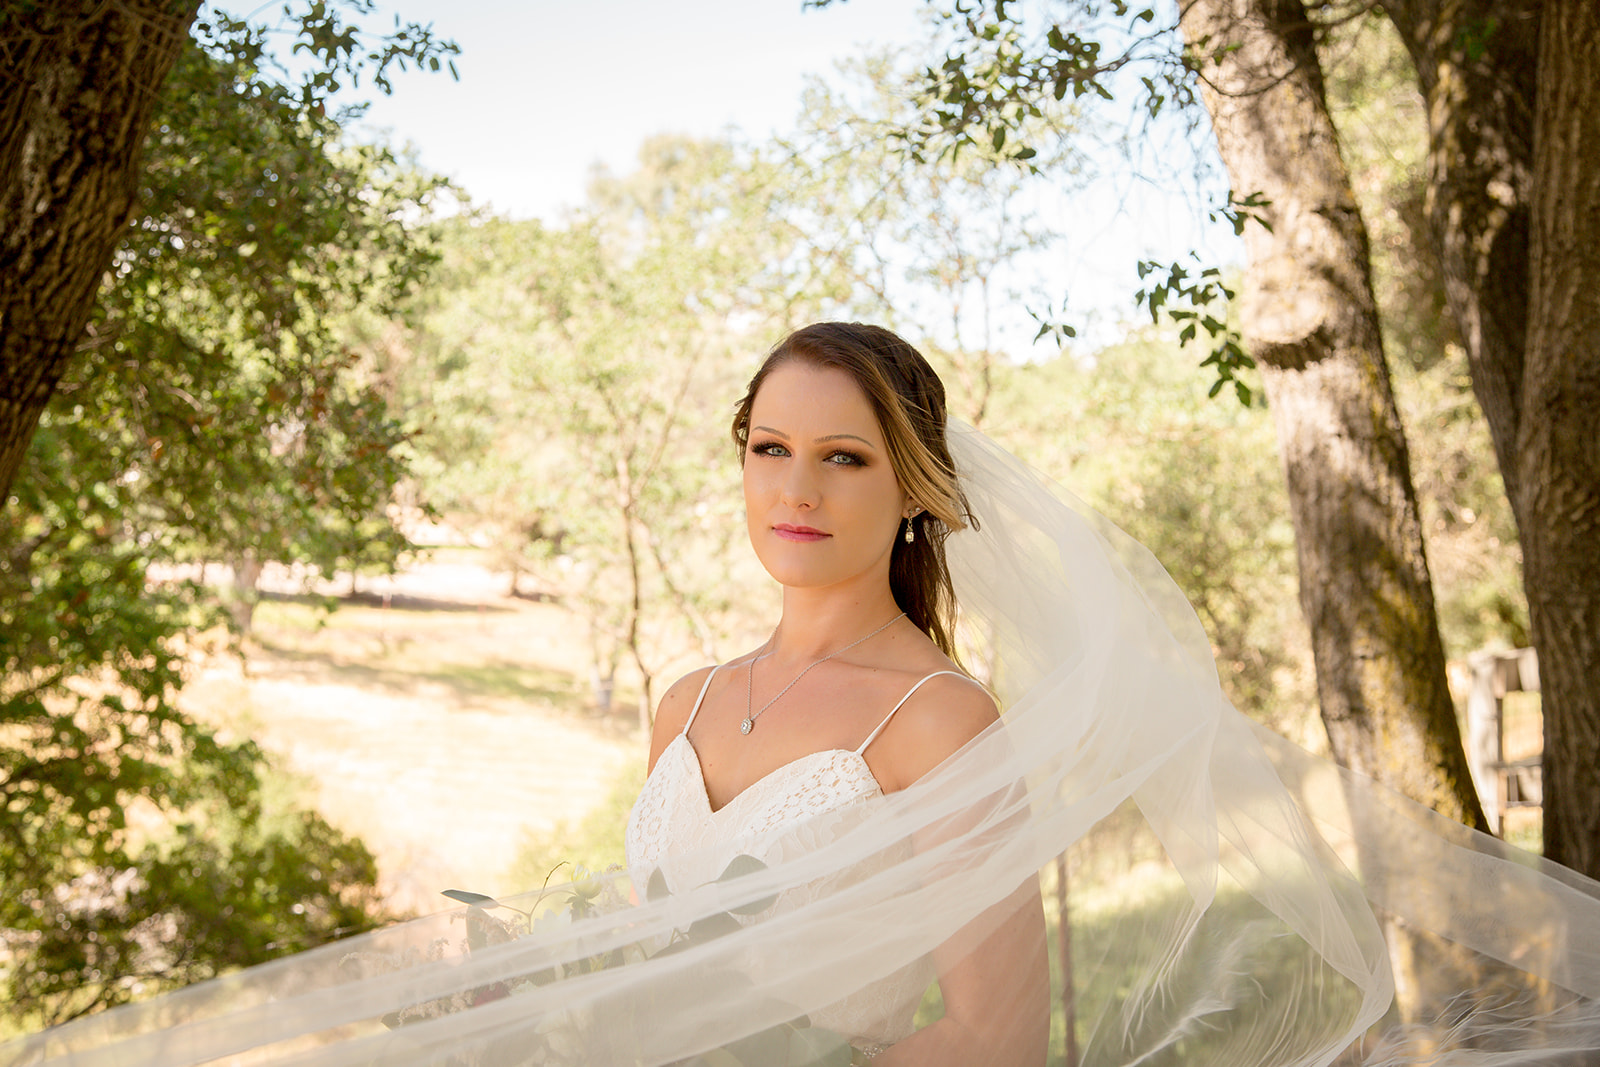 Bridal portrait at small, intimate wedding on the Central Coast of California.